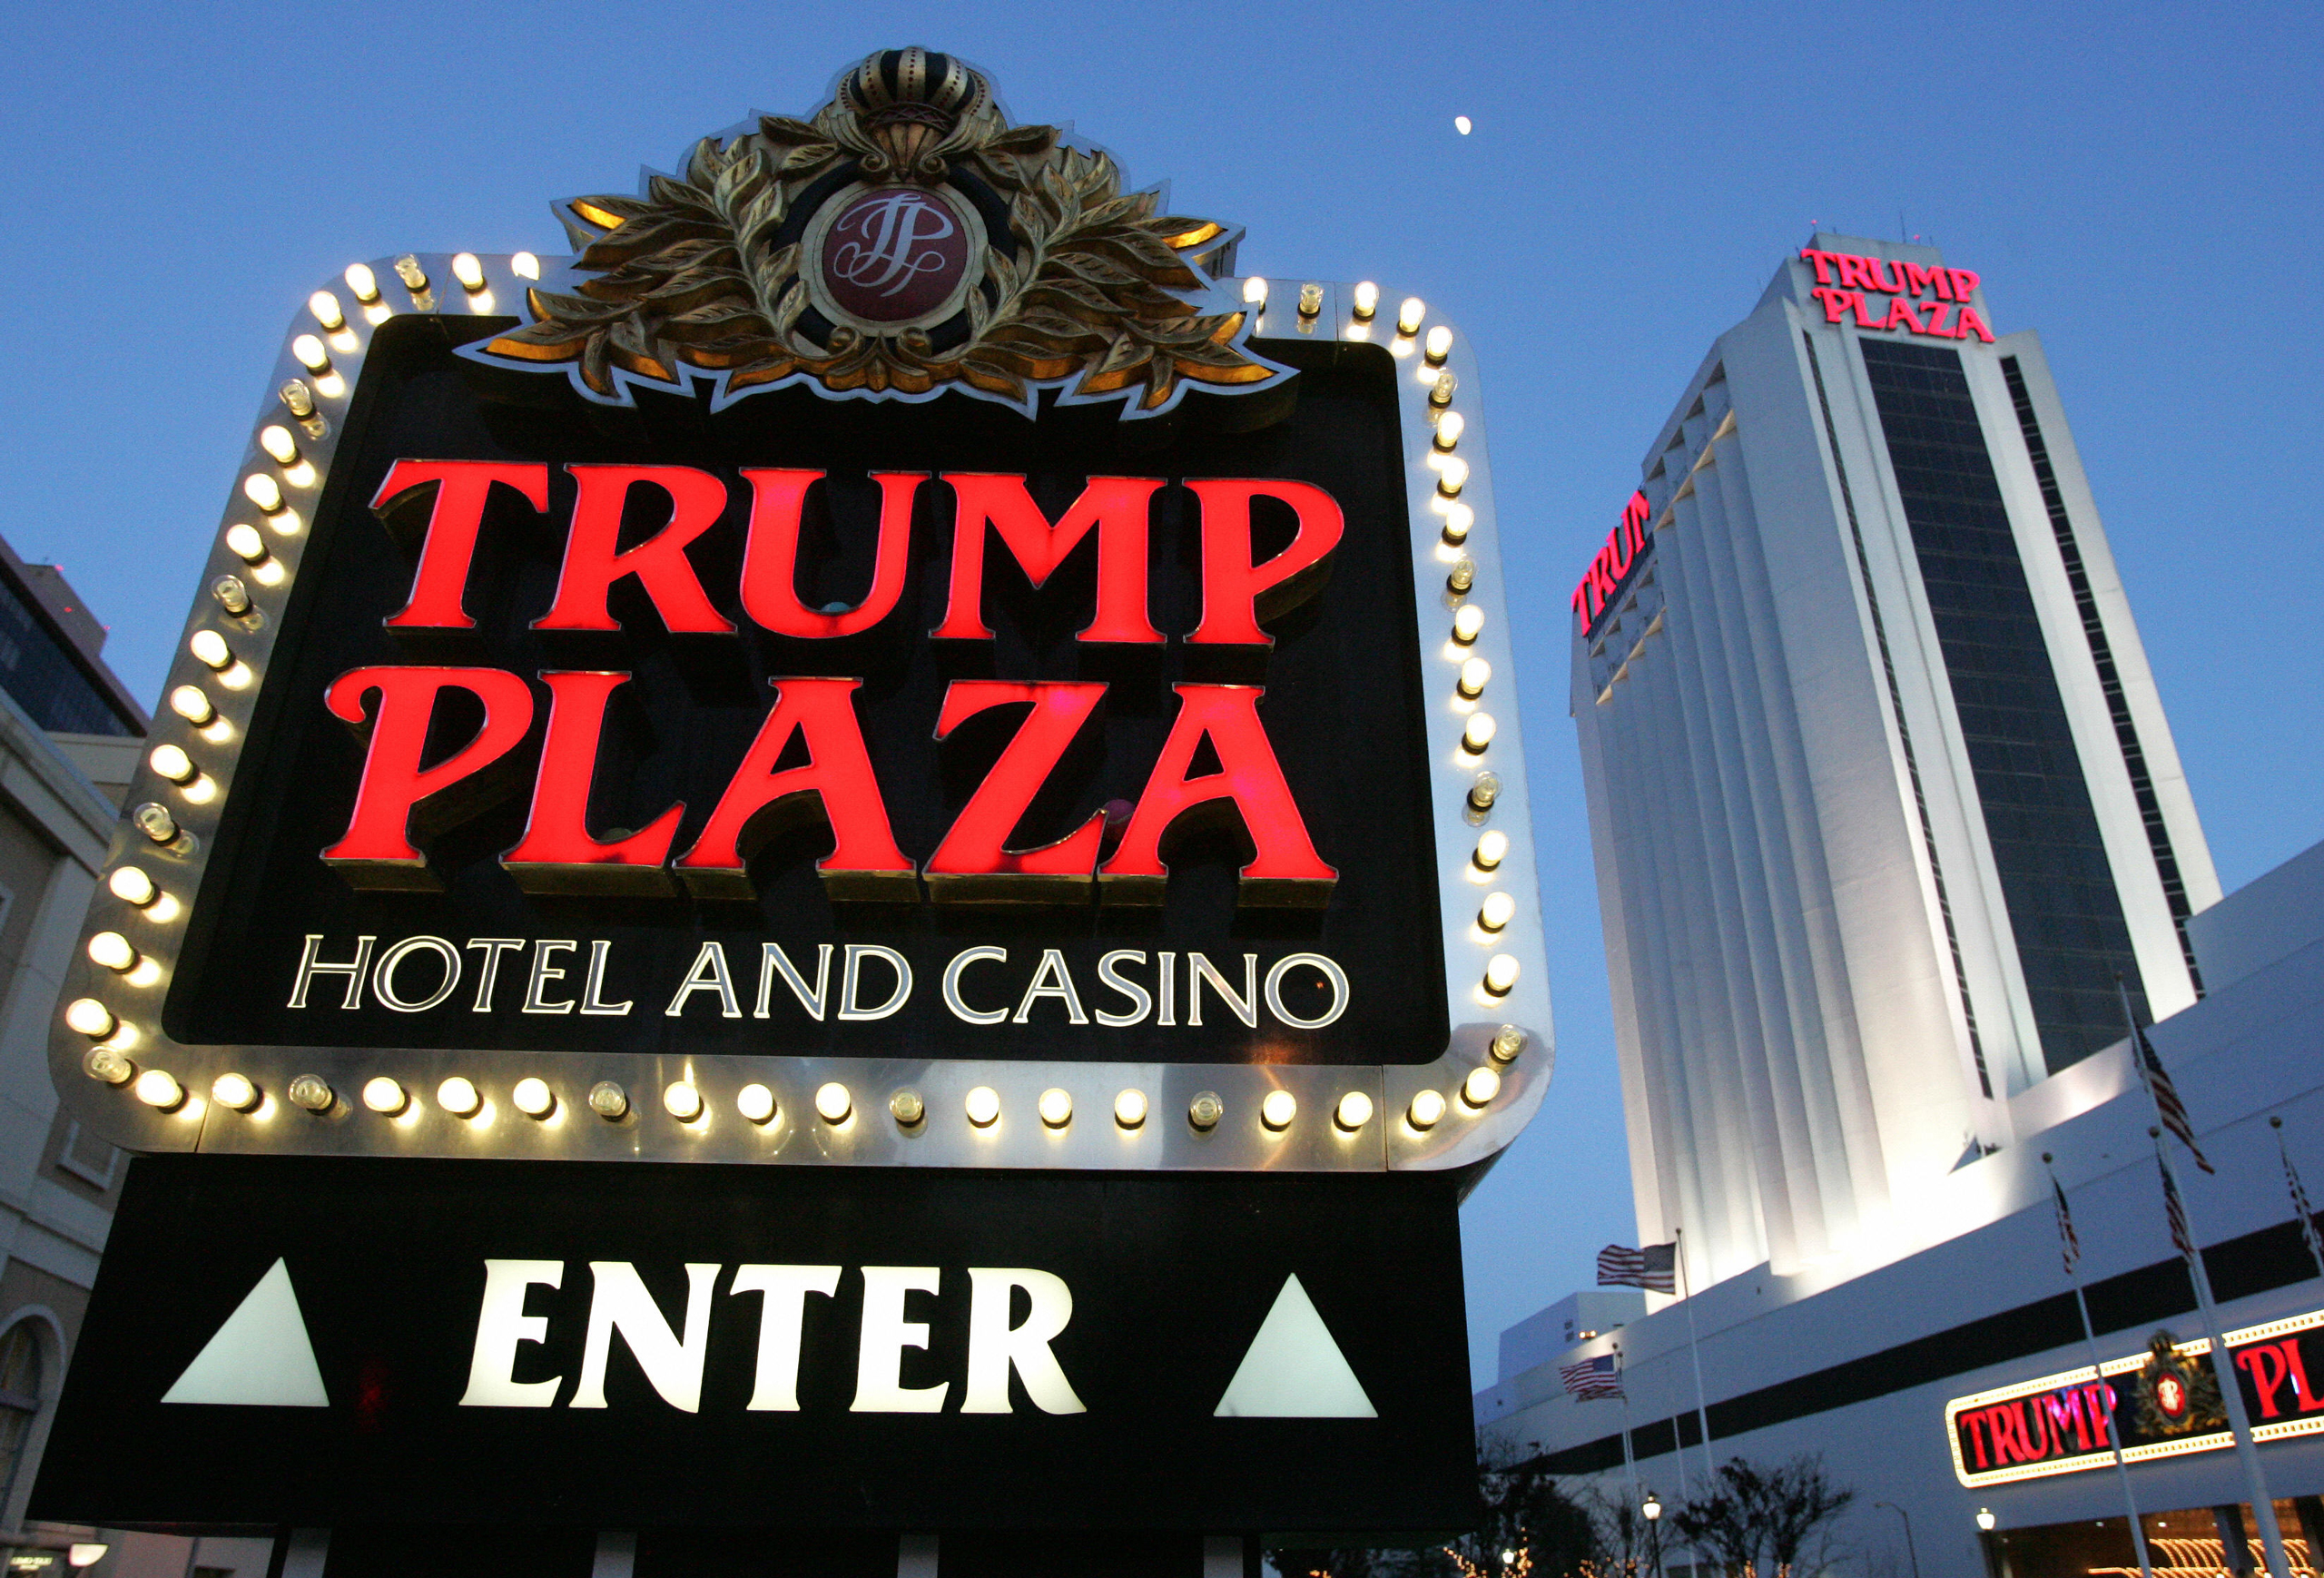 Atlantic City, UNITED STATES: The Trump Plaza hotel and casino in Atlantic City, New Jersey, is pictured 25 May 2007. Gambling has been legal in Atlantic City, one of the few such cities in the United States, since the first casino opened in 1978. AFP PHOTO/SAUL LOEB (Photo credit should read SAUL LOEB/AFP/Getty Images)